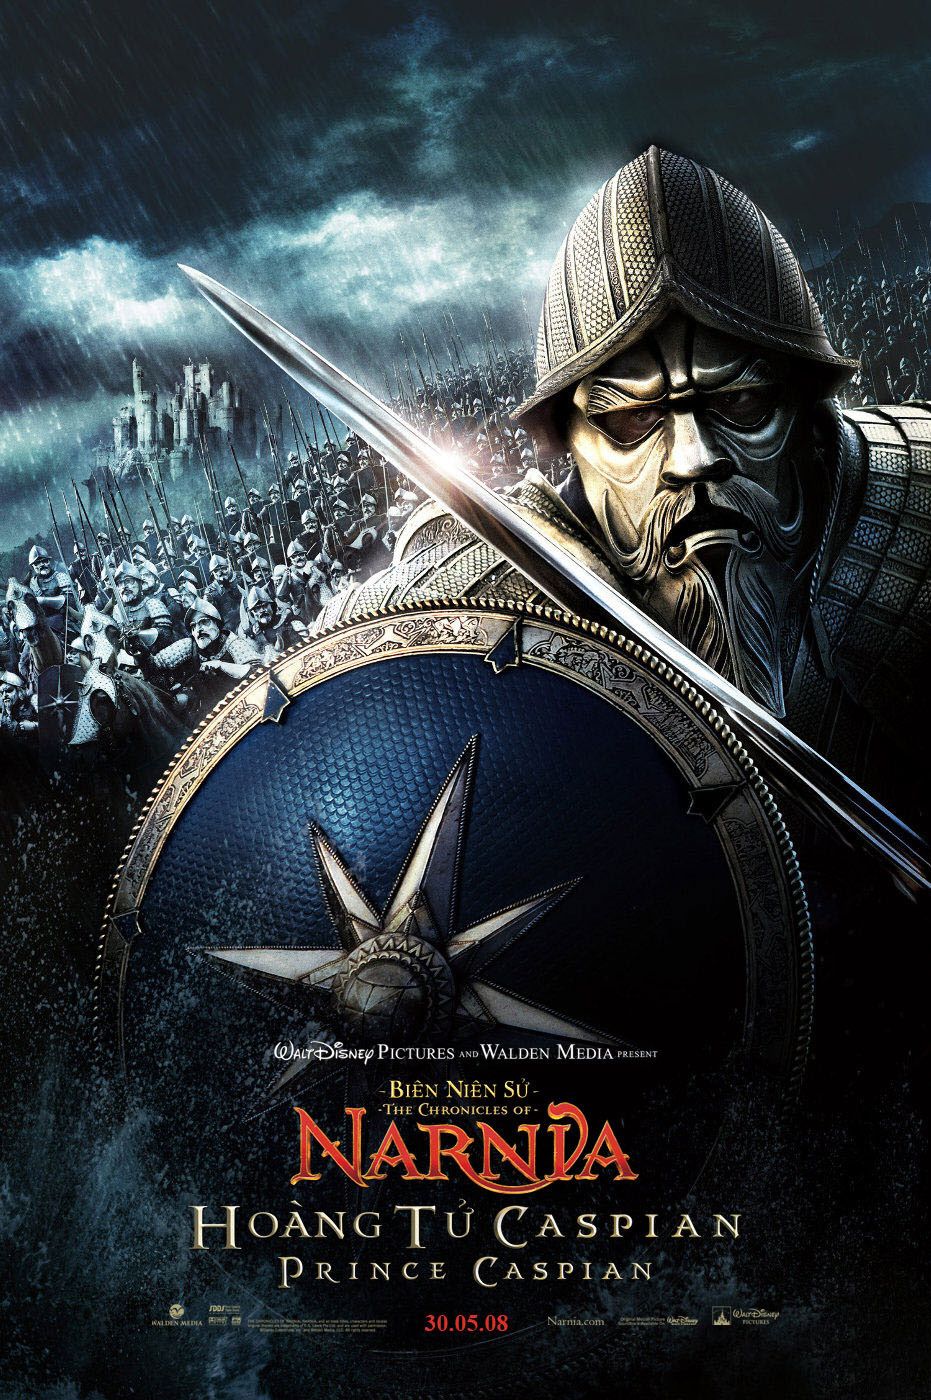 Extra Large Movie Poster Image for The Chronicles of Narnia: Prince Caspian (#6 of 7)